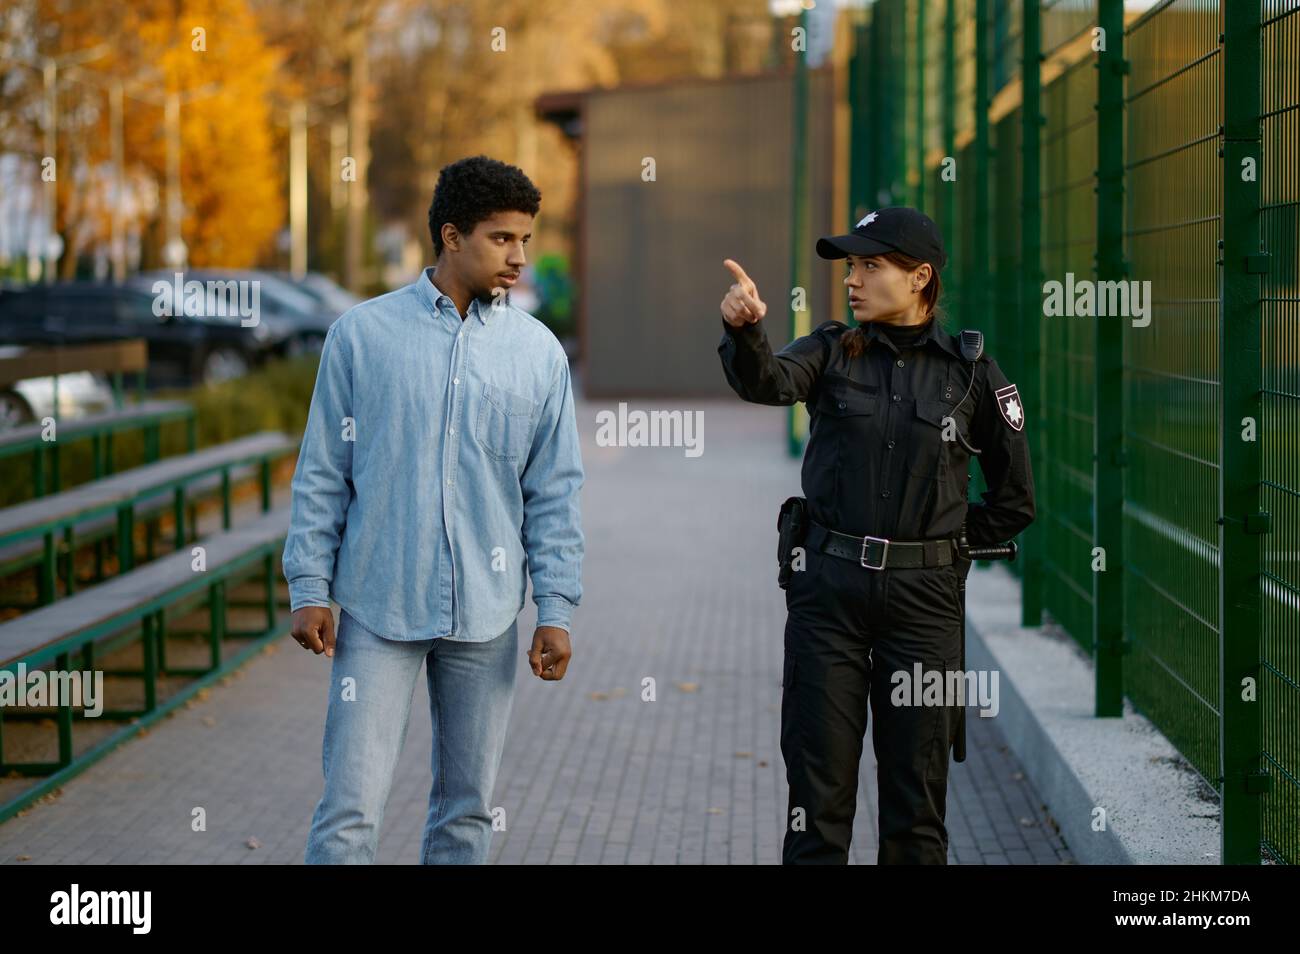 Police woman showing way to man passerby Stock Photo